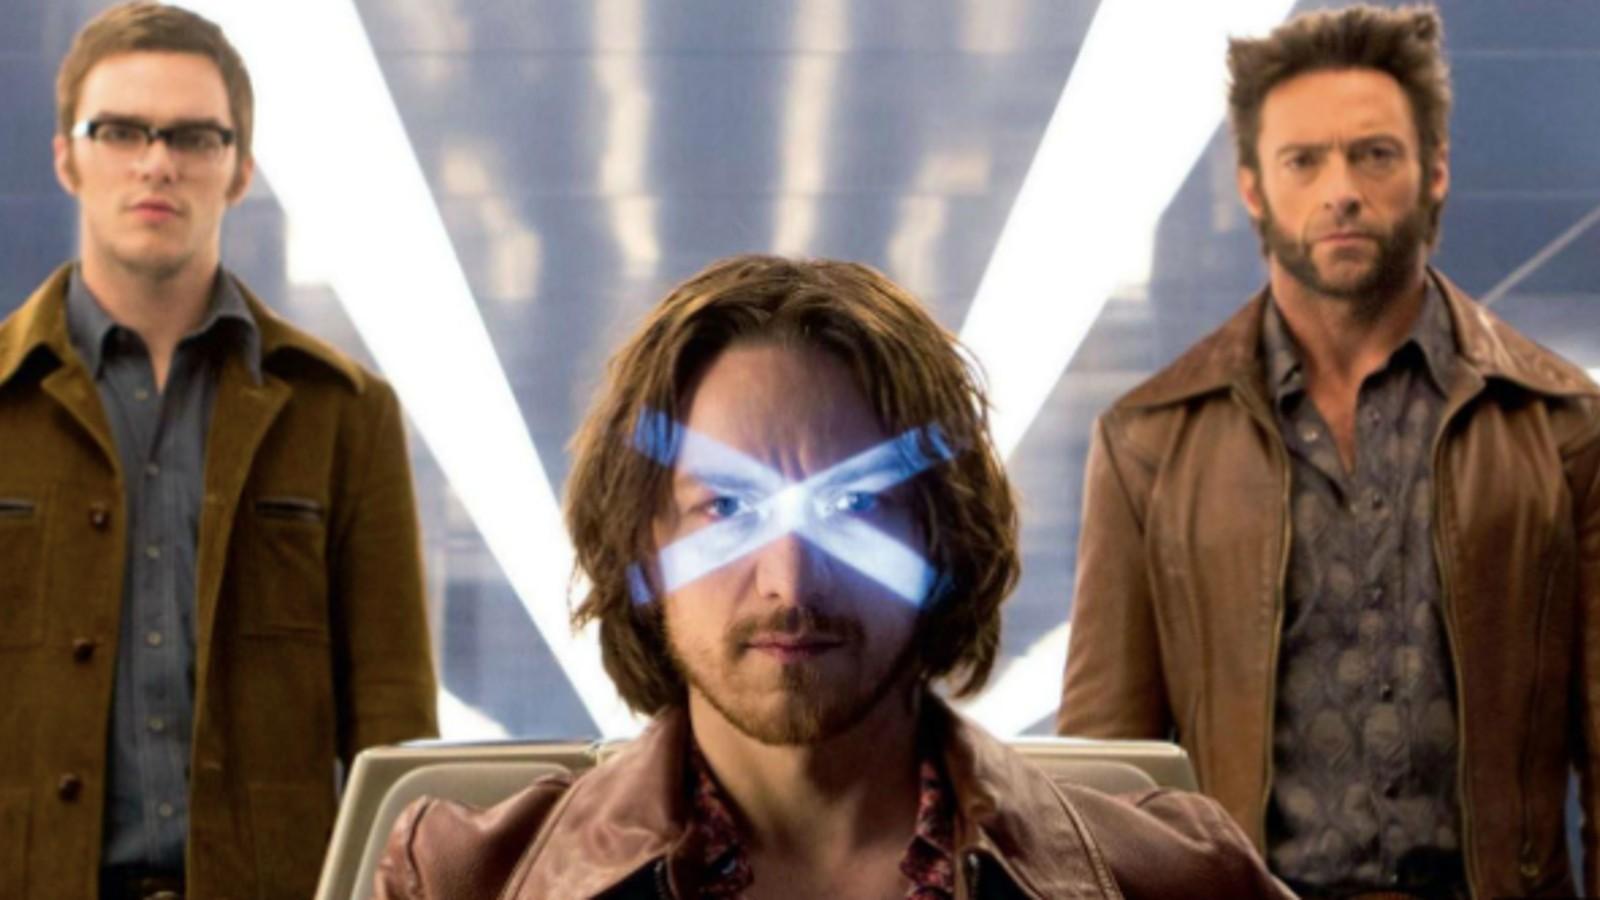 Nicholas Hoult, Hugh Jackman, and James McAvoy in X-Men: Days of Future Past